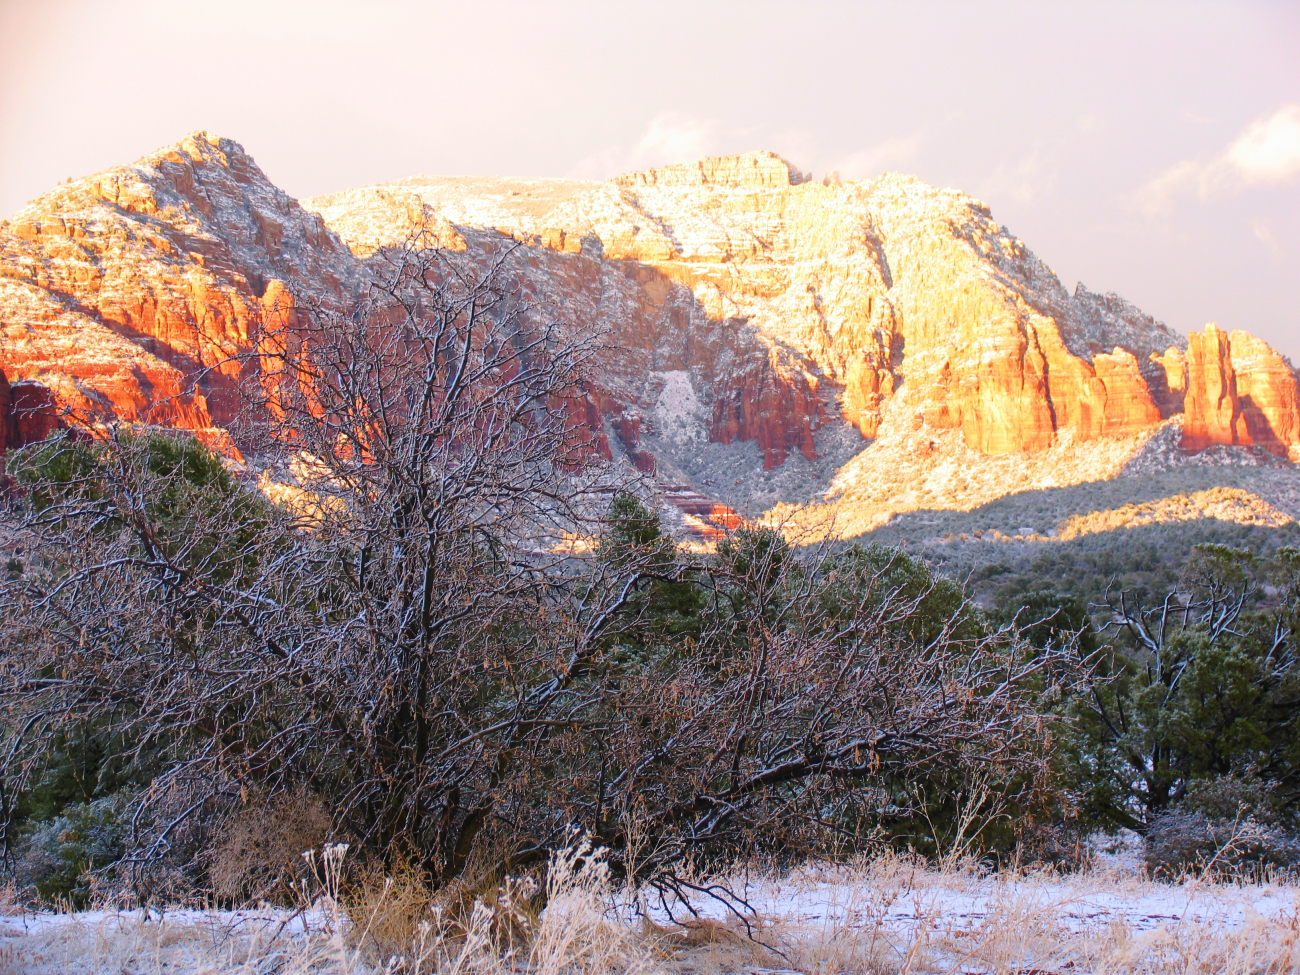 A majestic scene of sandstone mountains dusted with snow and valley oaks andpinion pines